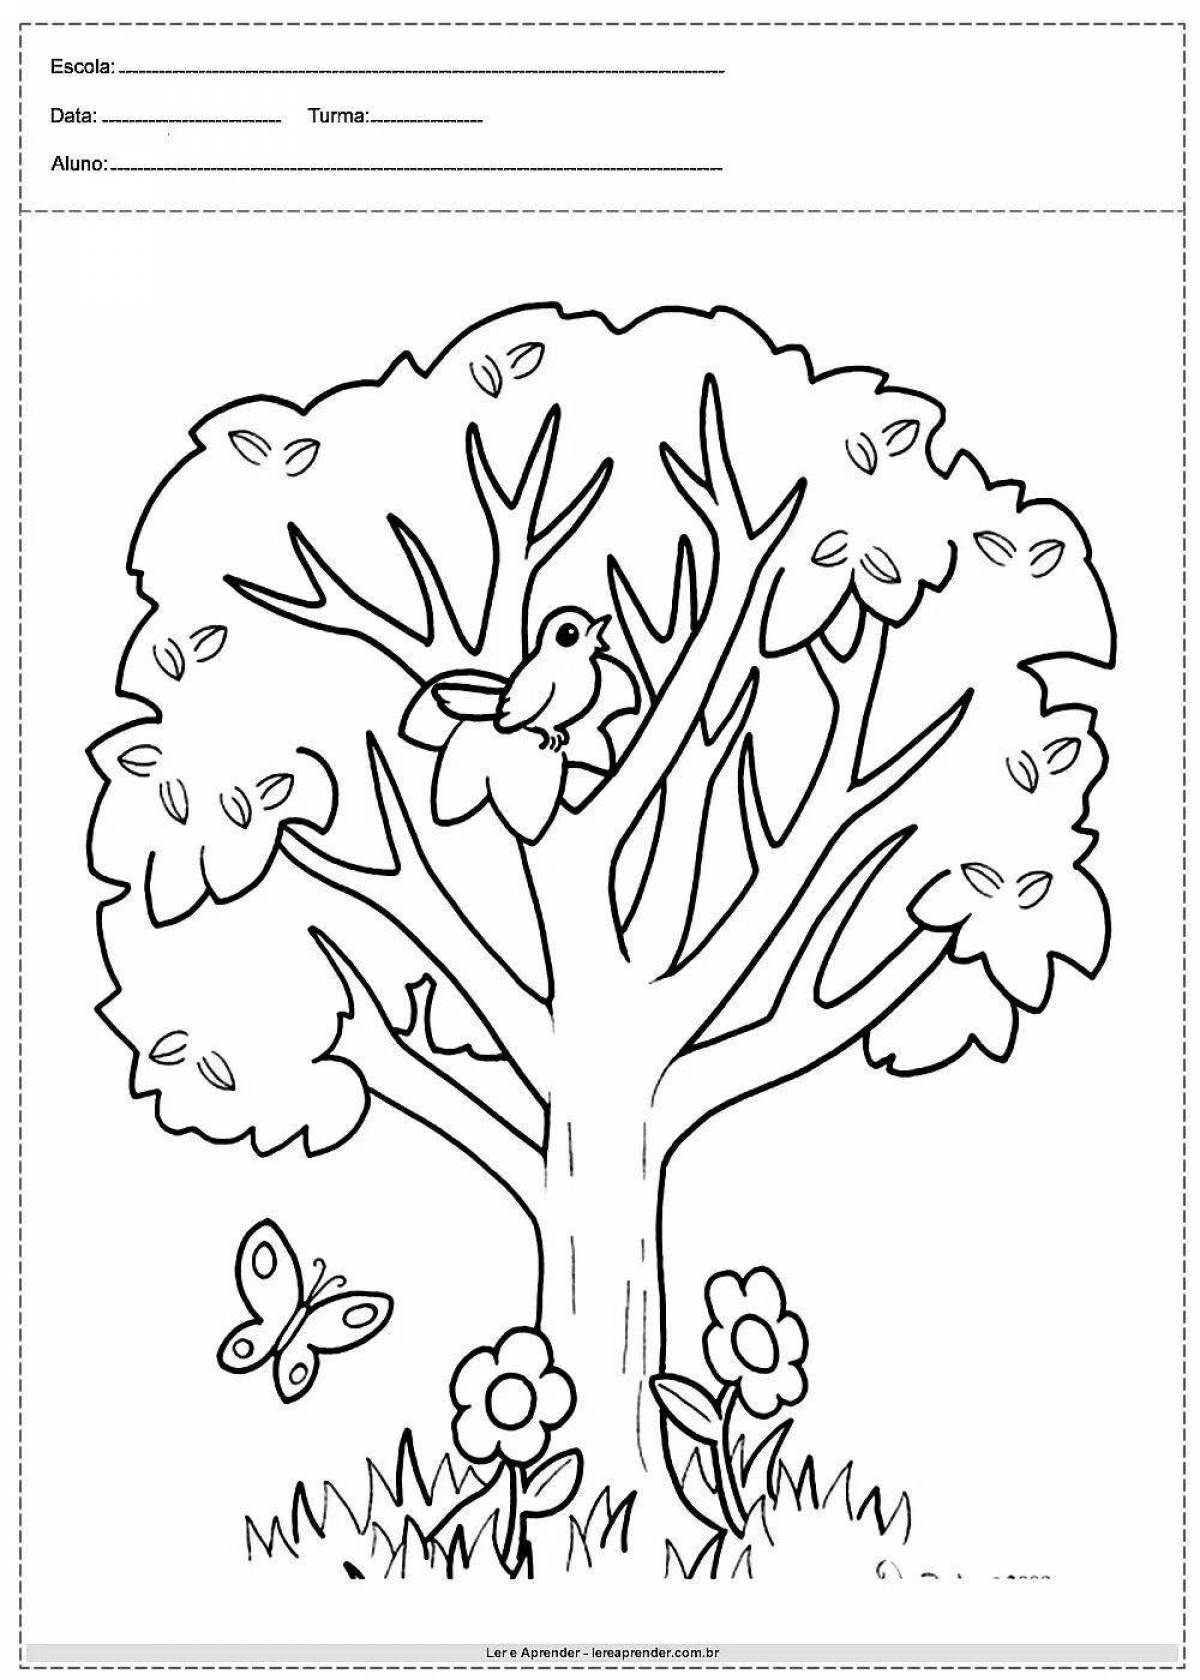 Coloring tree splatter for children 4-5 years old